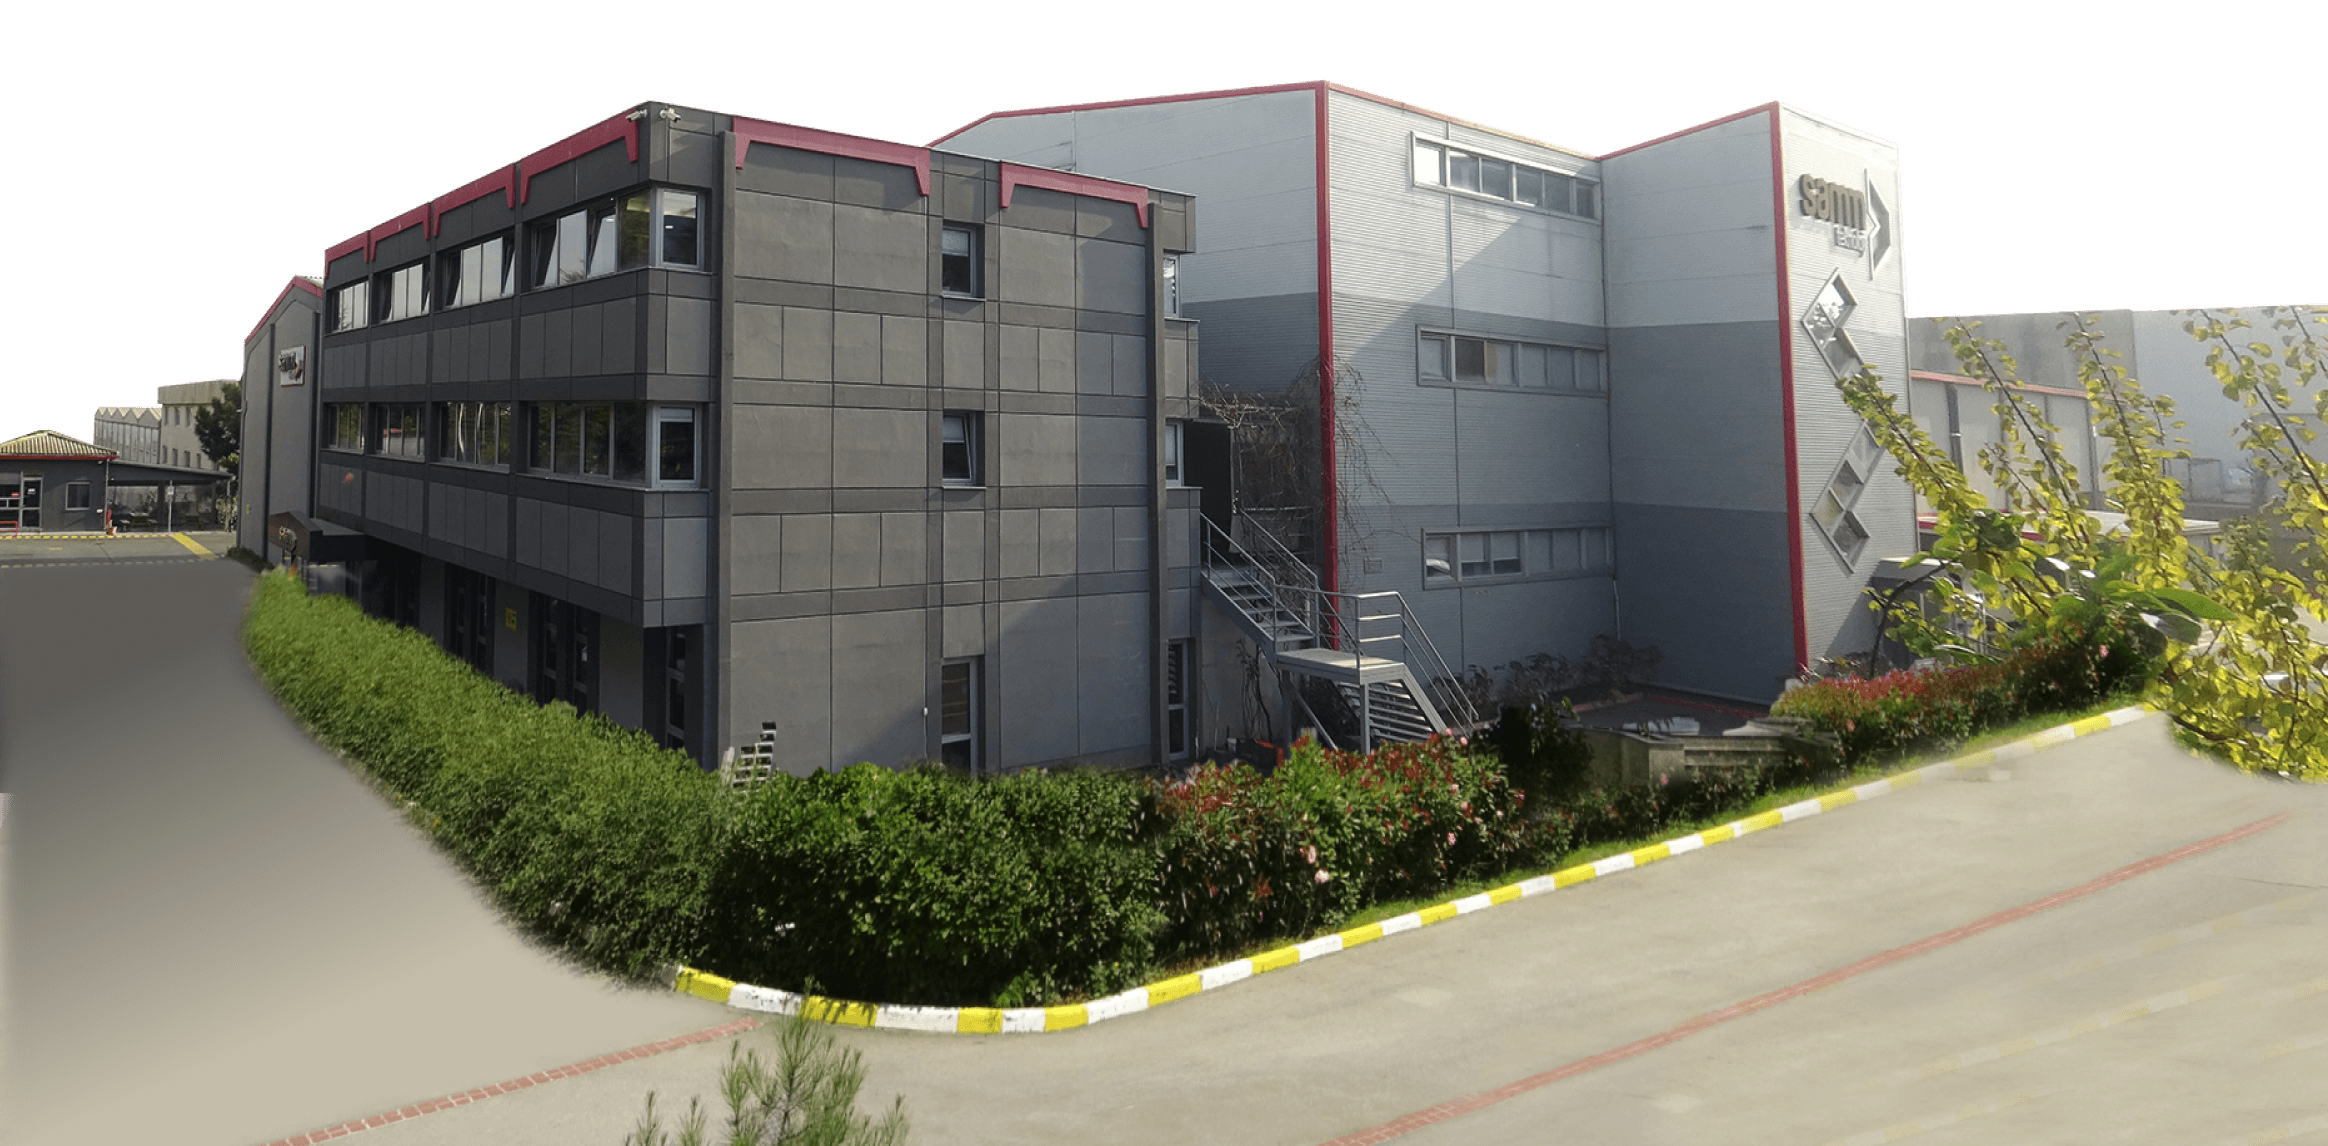 SAMM-1 Fiber Optic Cable Manufactures Facility and R&D Center